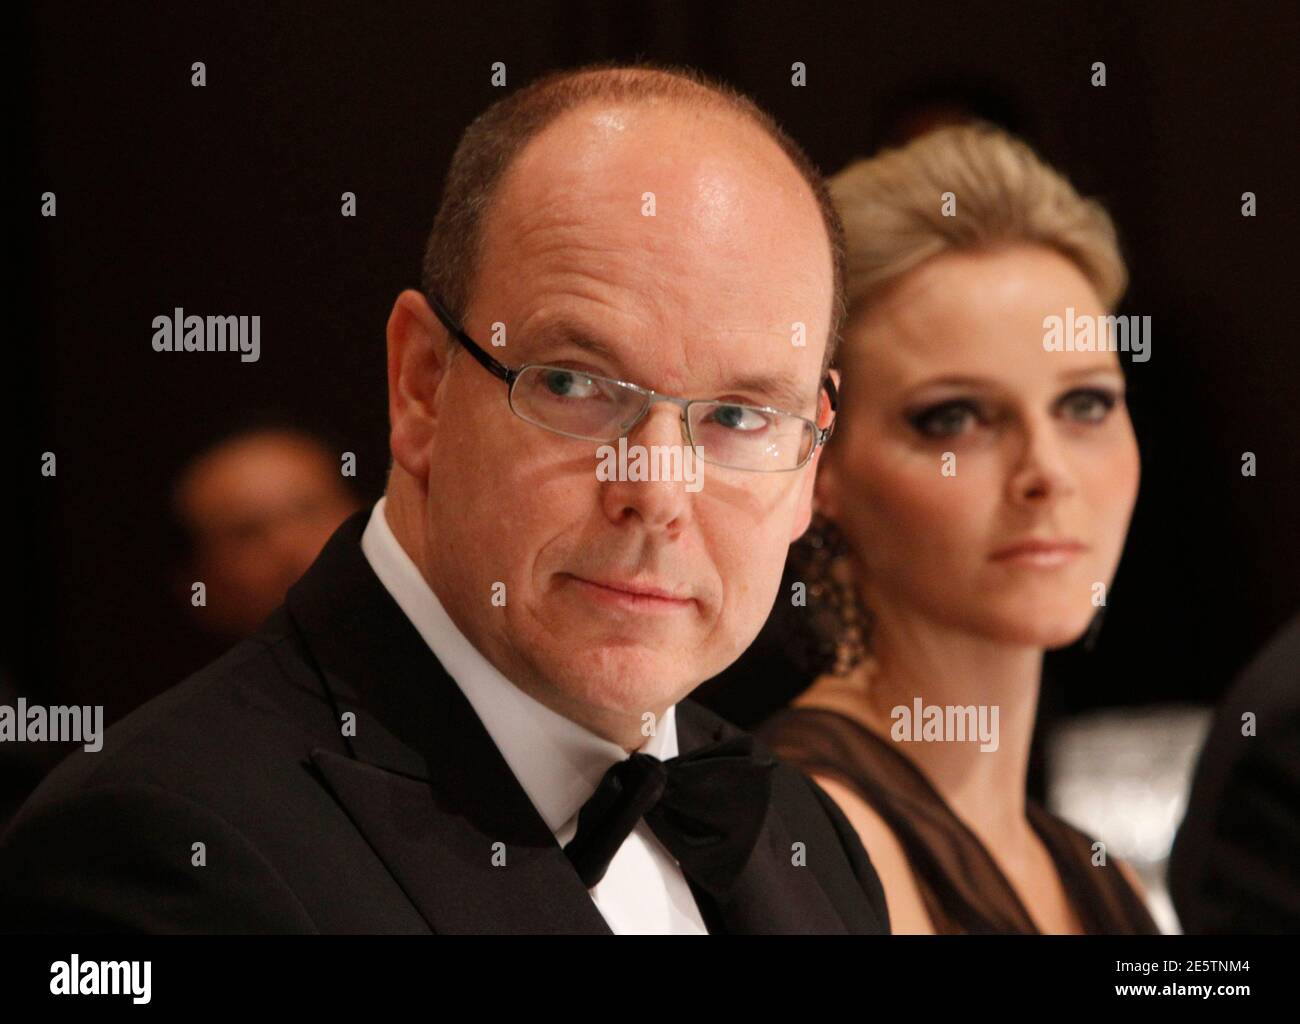 Monaco's Prince Albert II (L) and his fiancee Charlene Wittstock attend at a gala dinner hosted by BirdLife International in Tokyo October 29, 2010. REUTERS/Issei Kato (JAPAN - Tags: ENTERTAINMENT PROFILE ROYALS) Stock Photo